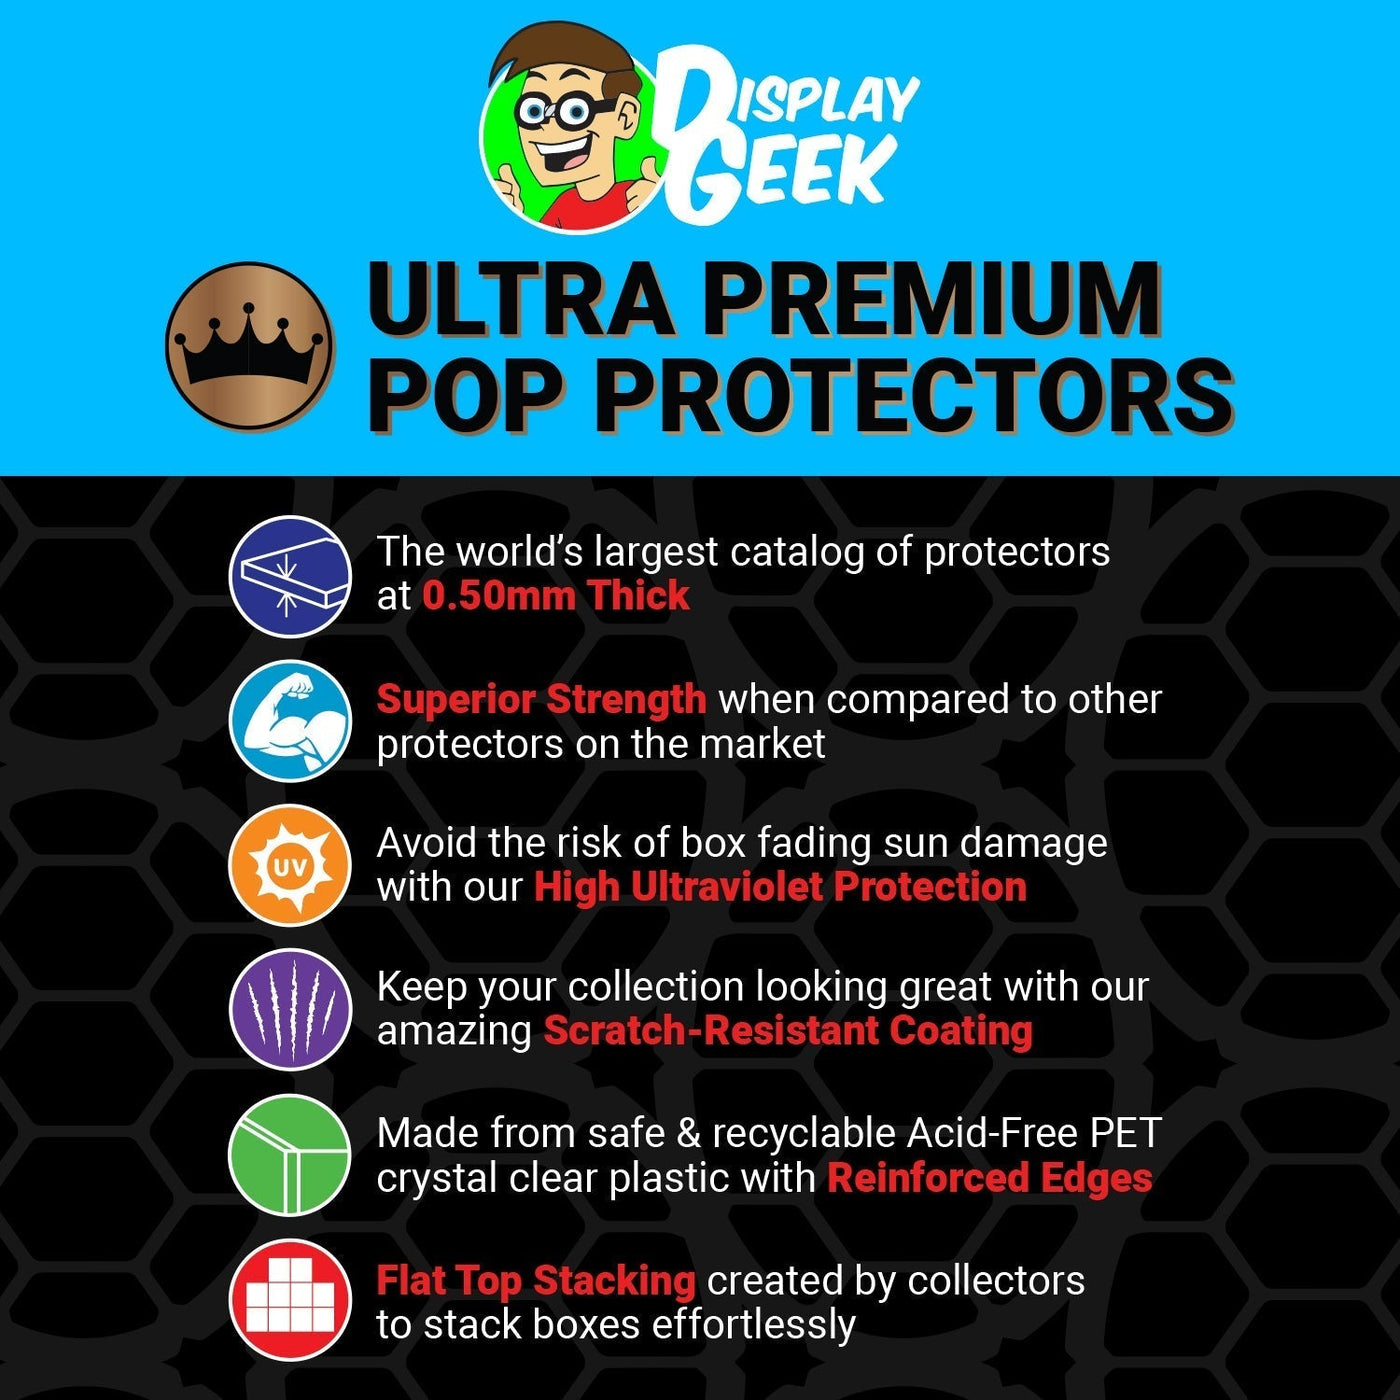 Pop Protector for 2 Pack The Mandalorian & IG-11 Funko Pop on The Protector Guide App by Display Geek